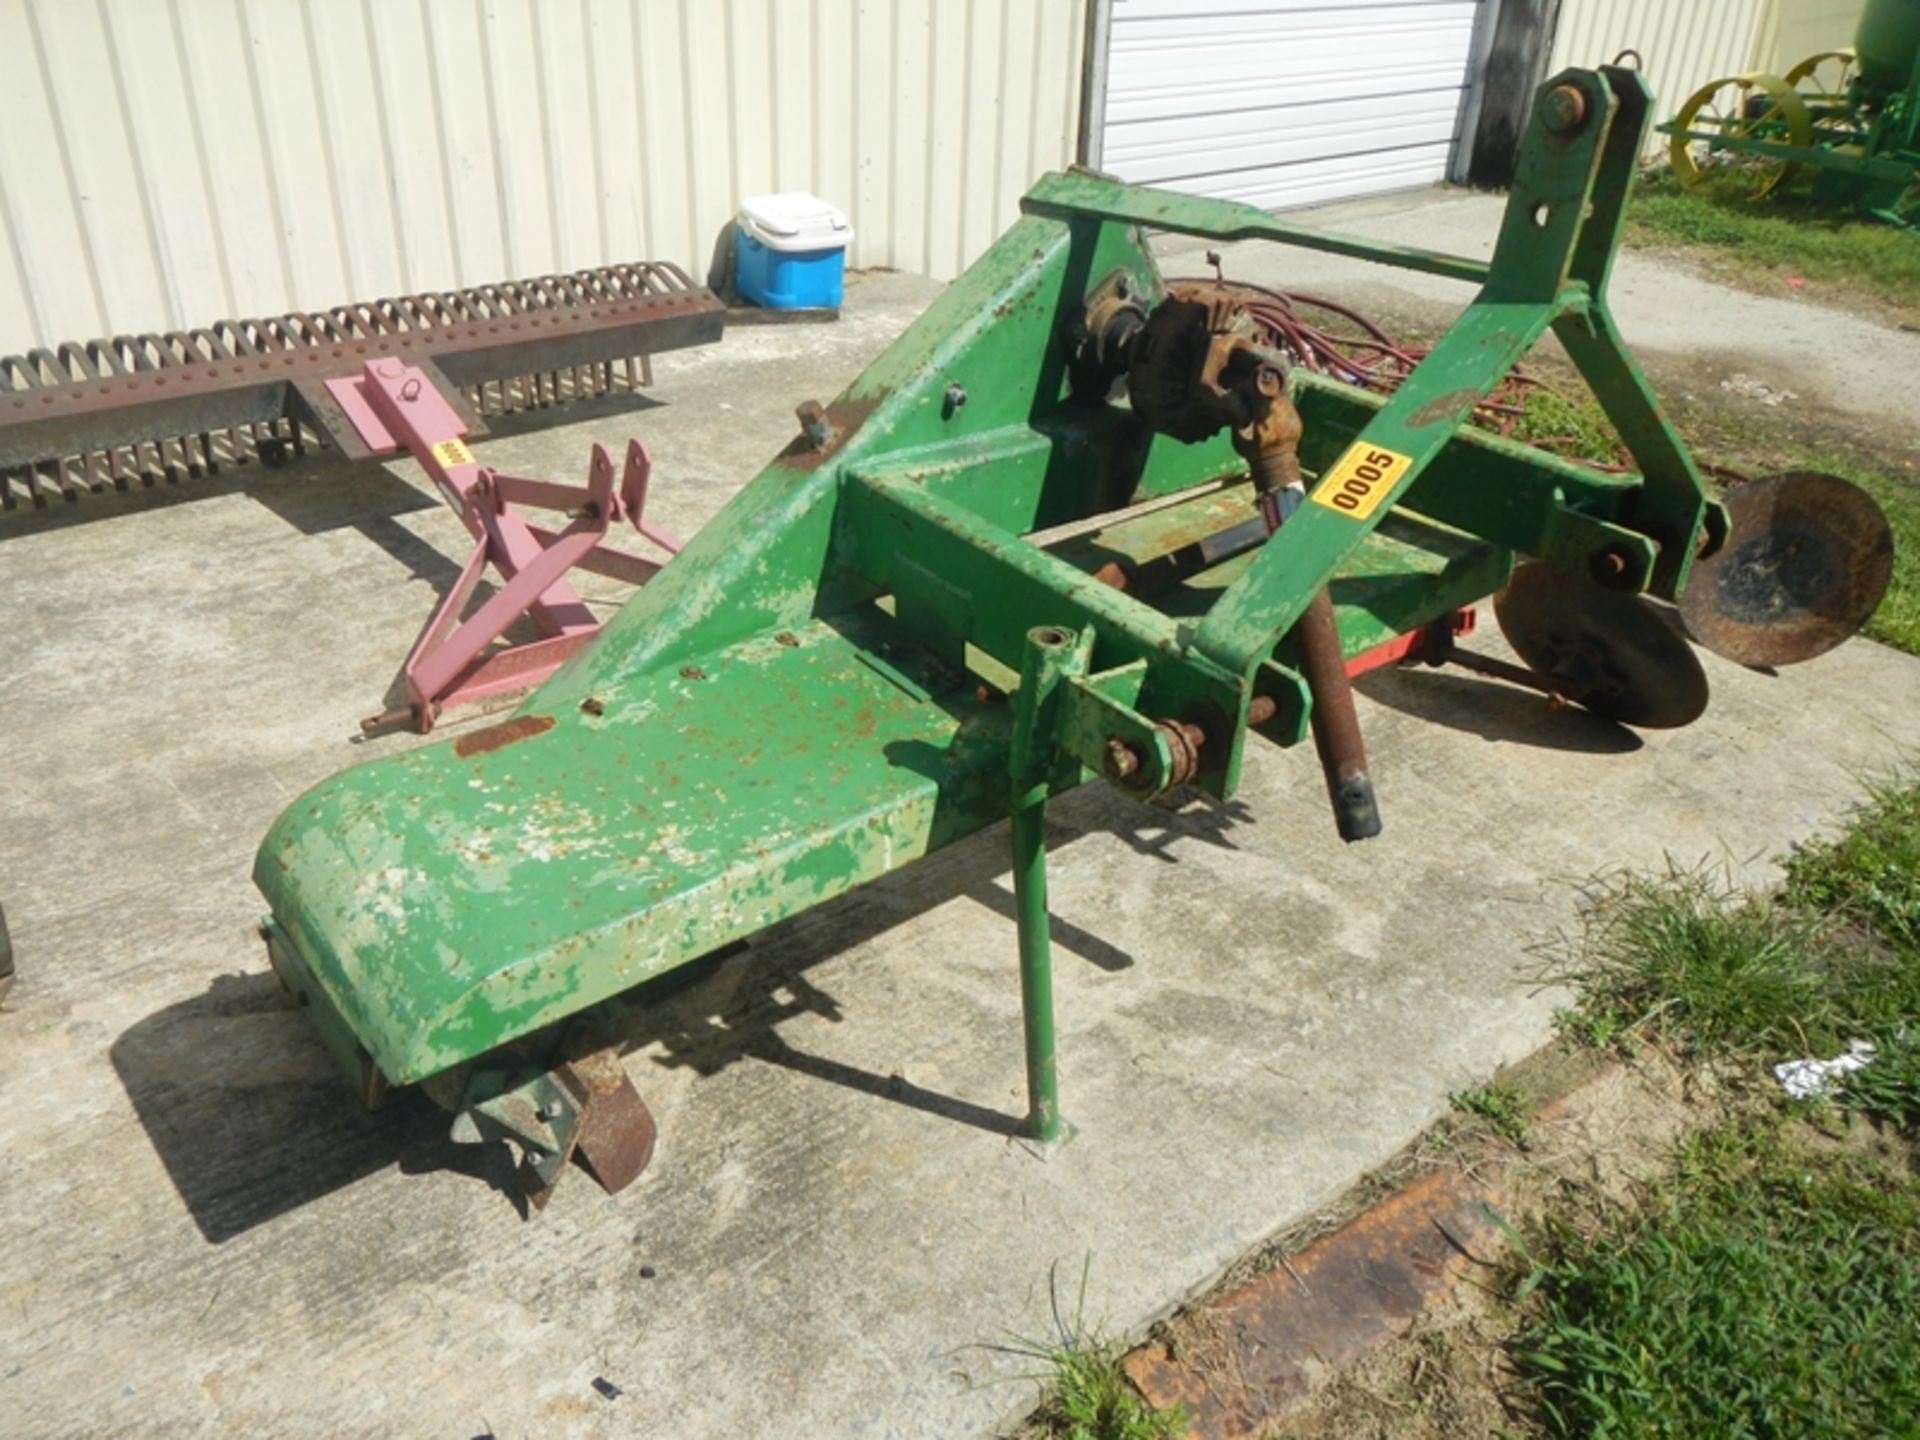 Reddick off set trencher has been modified so you can change bearings without removing bottom shaft - Image 2 of 3